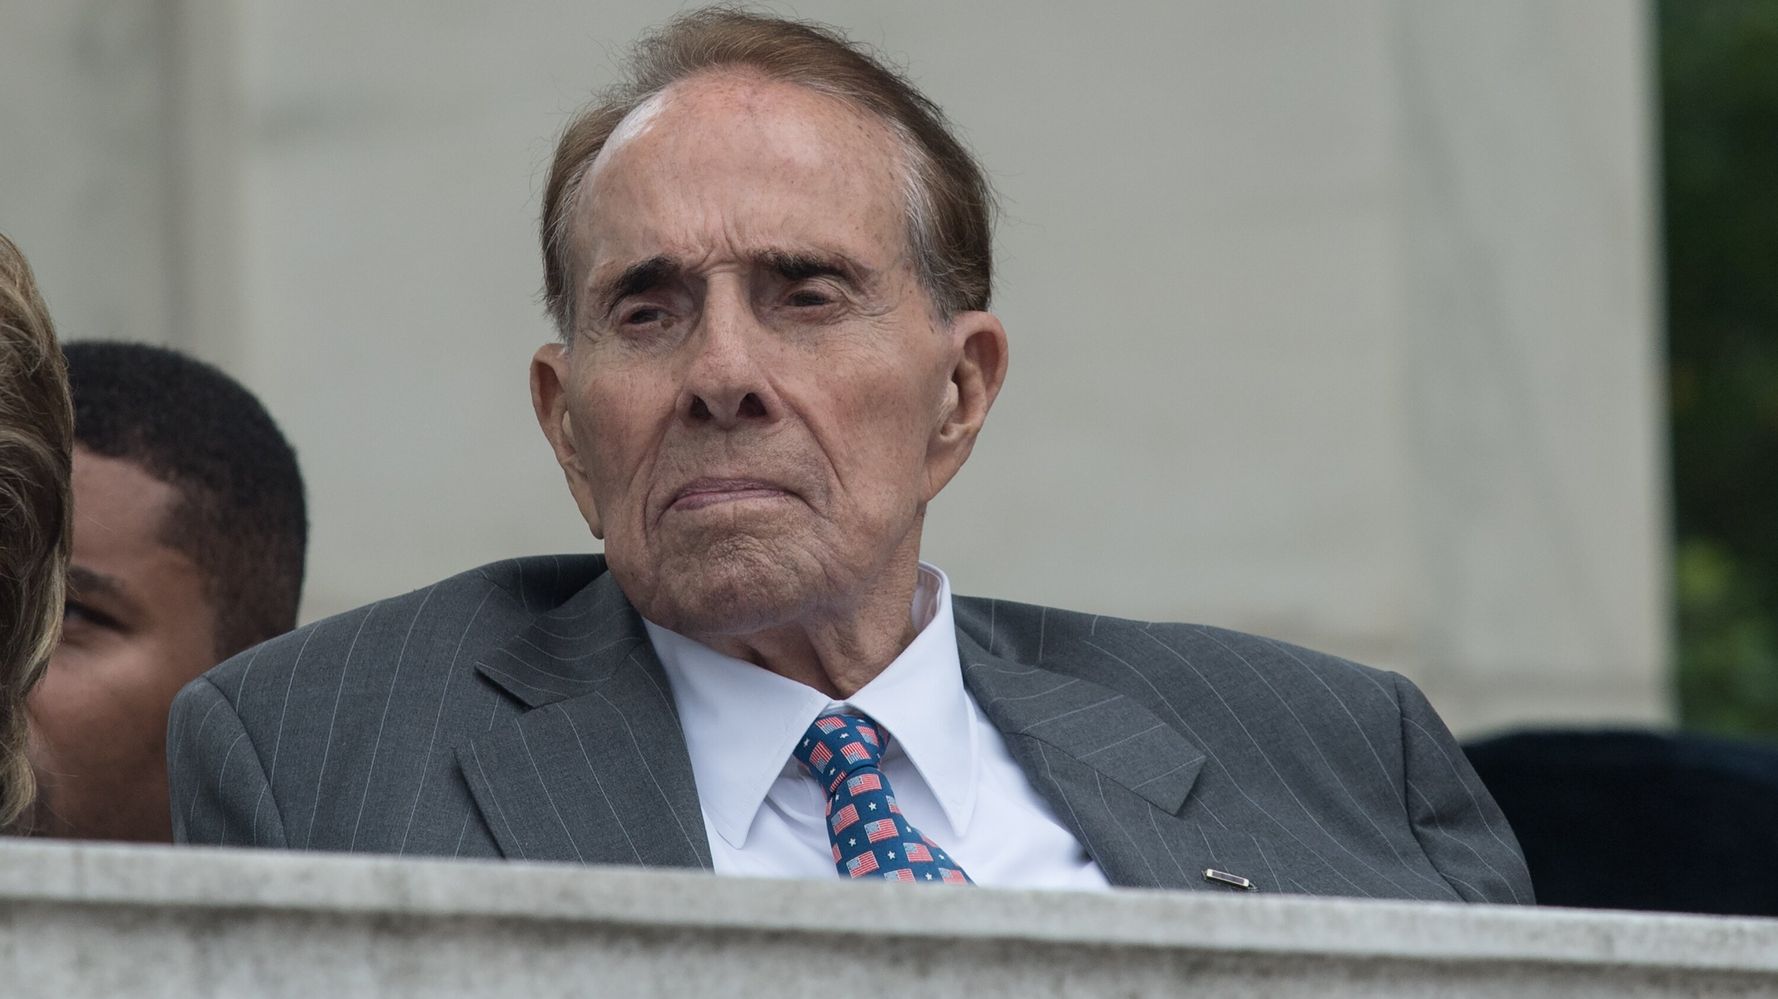 Bob Dole, Former Republican Senator And Presidential Nominee, Dies At 98 | HuffPost Latest News